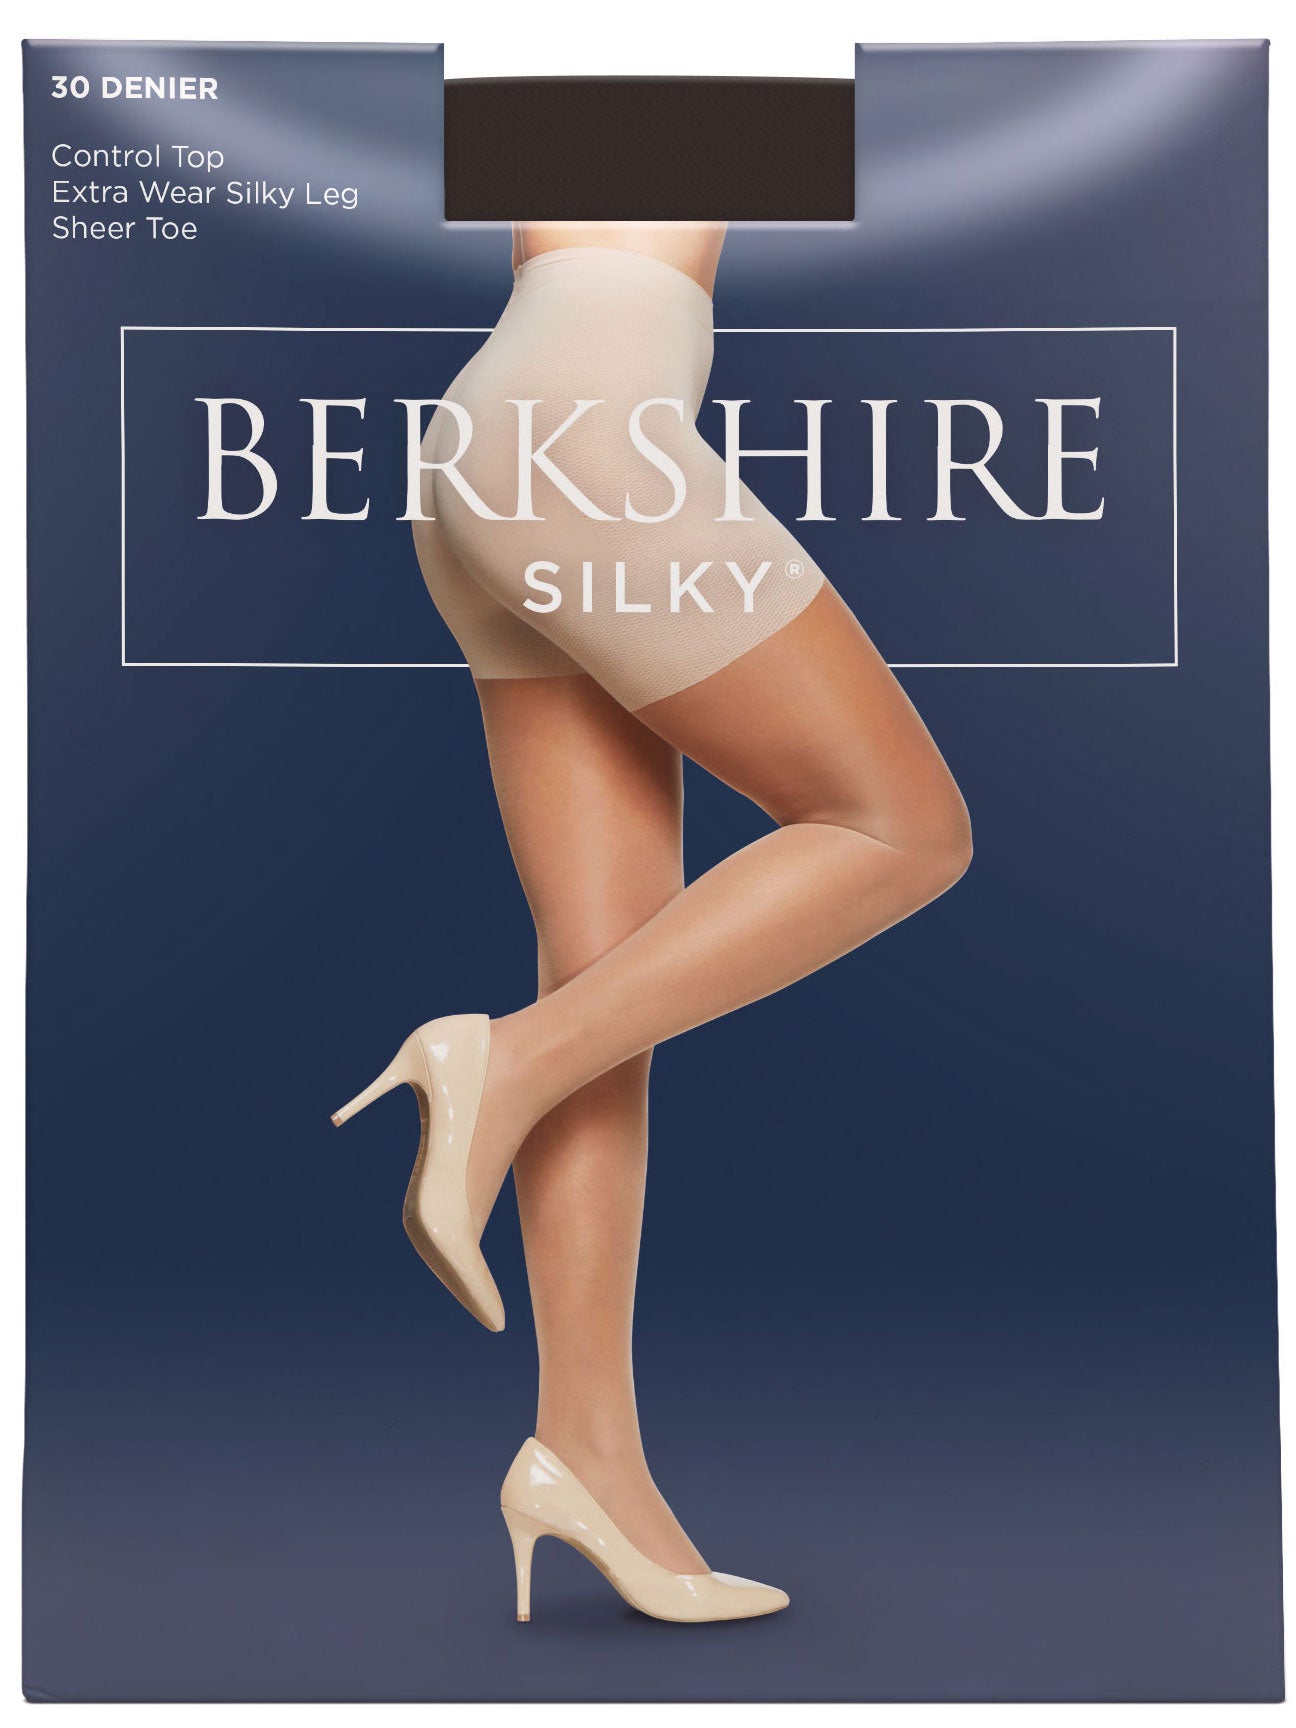 Berkshire Silky Sheer Control Top Pantyhose With Sandalfoot Toe